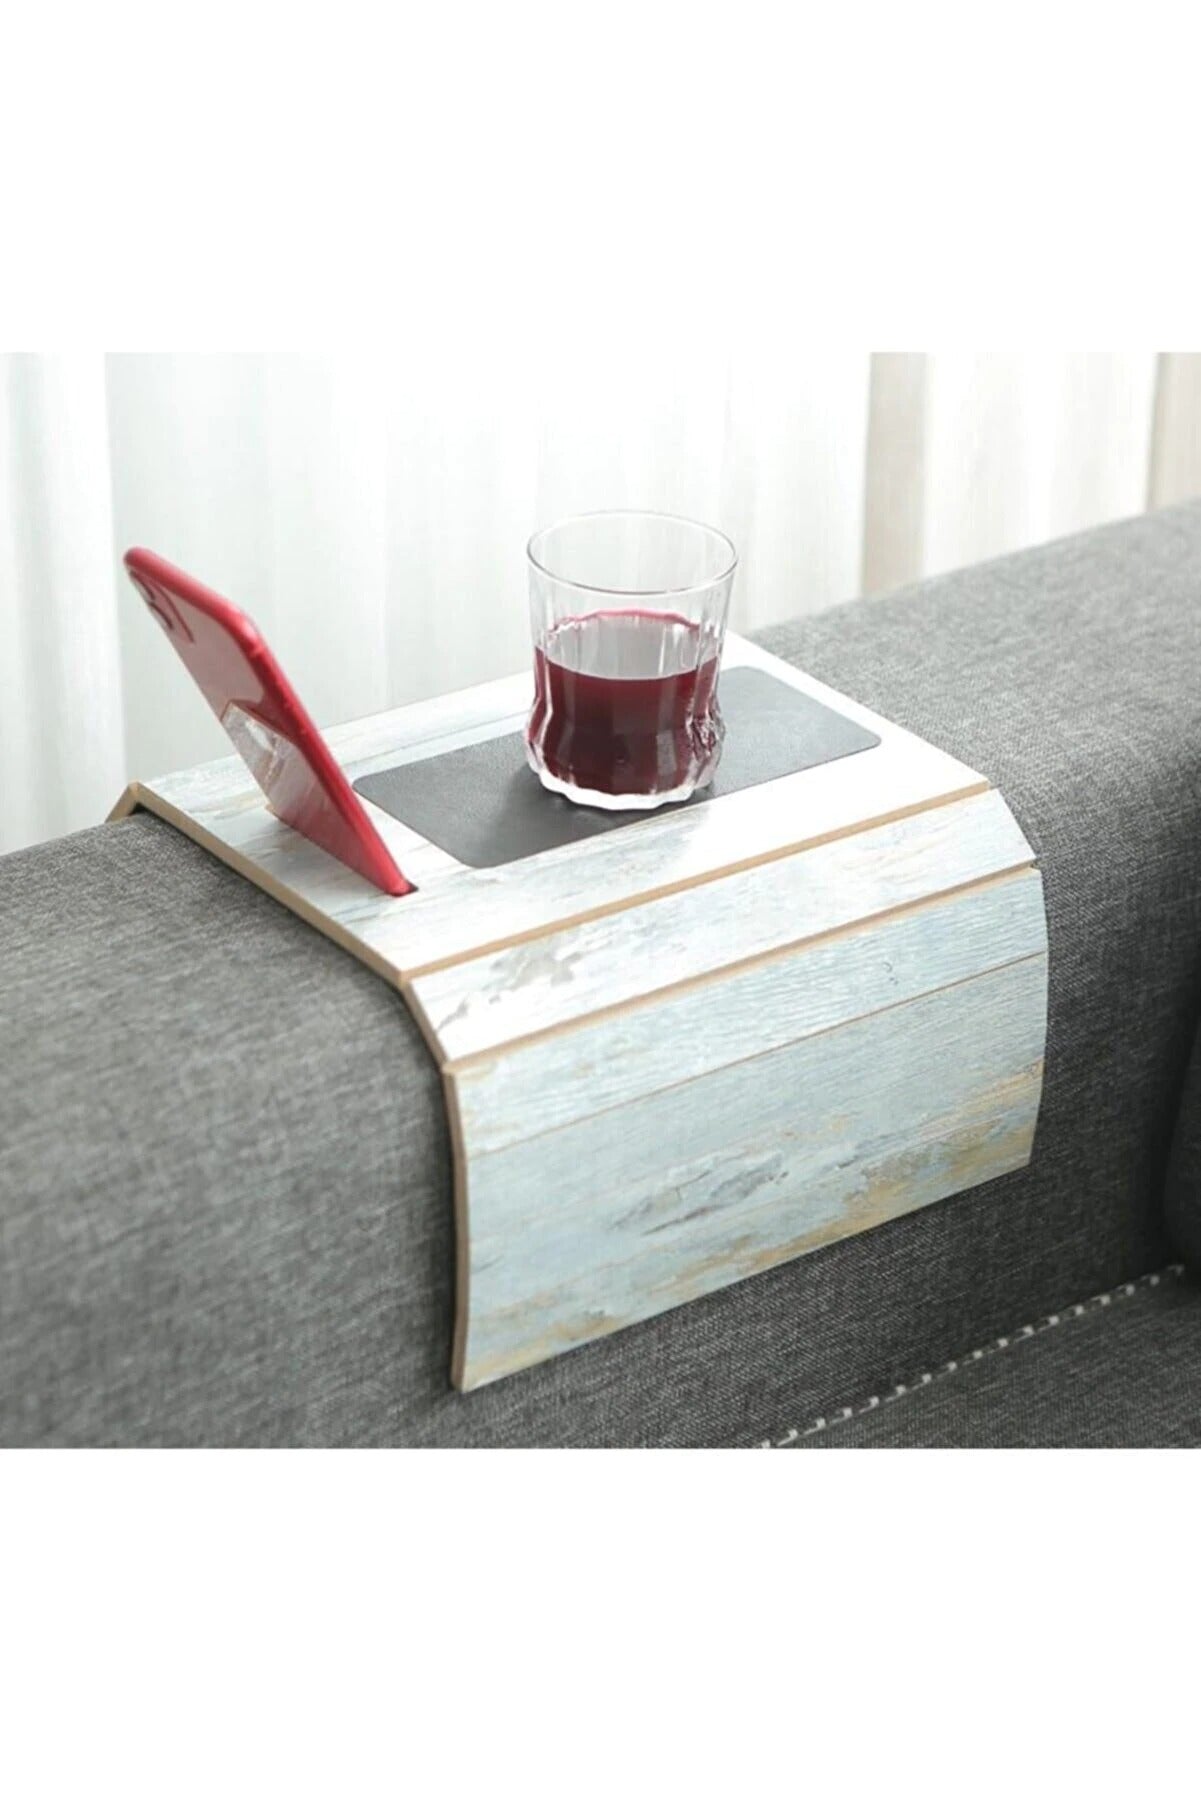 Sofa Tray, Couch Table Tray, Based Phone Holder 50x27.8 cm